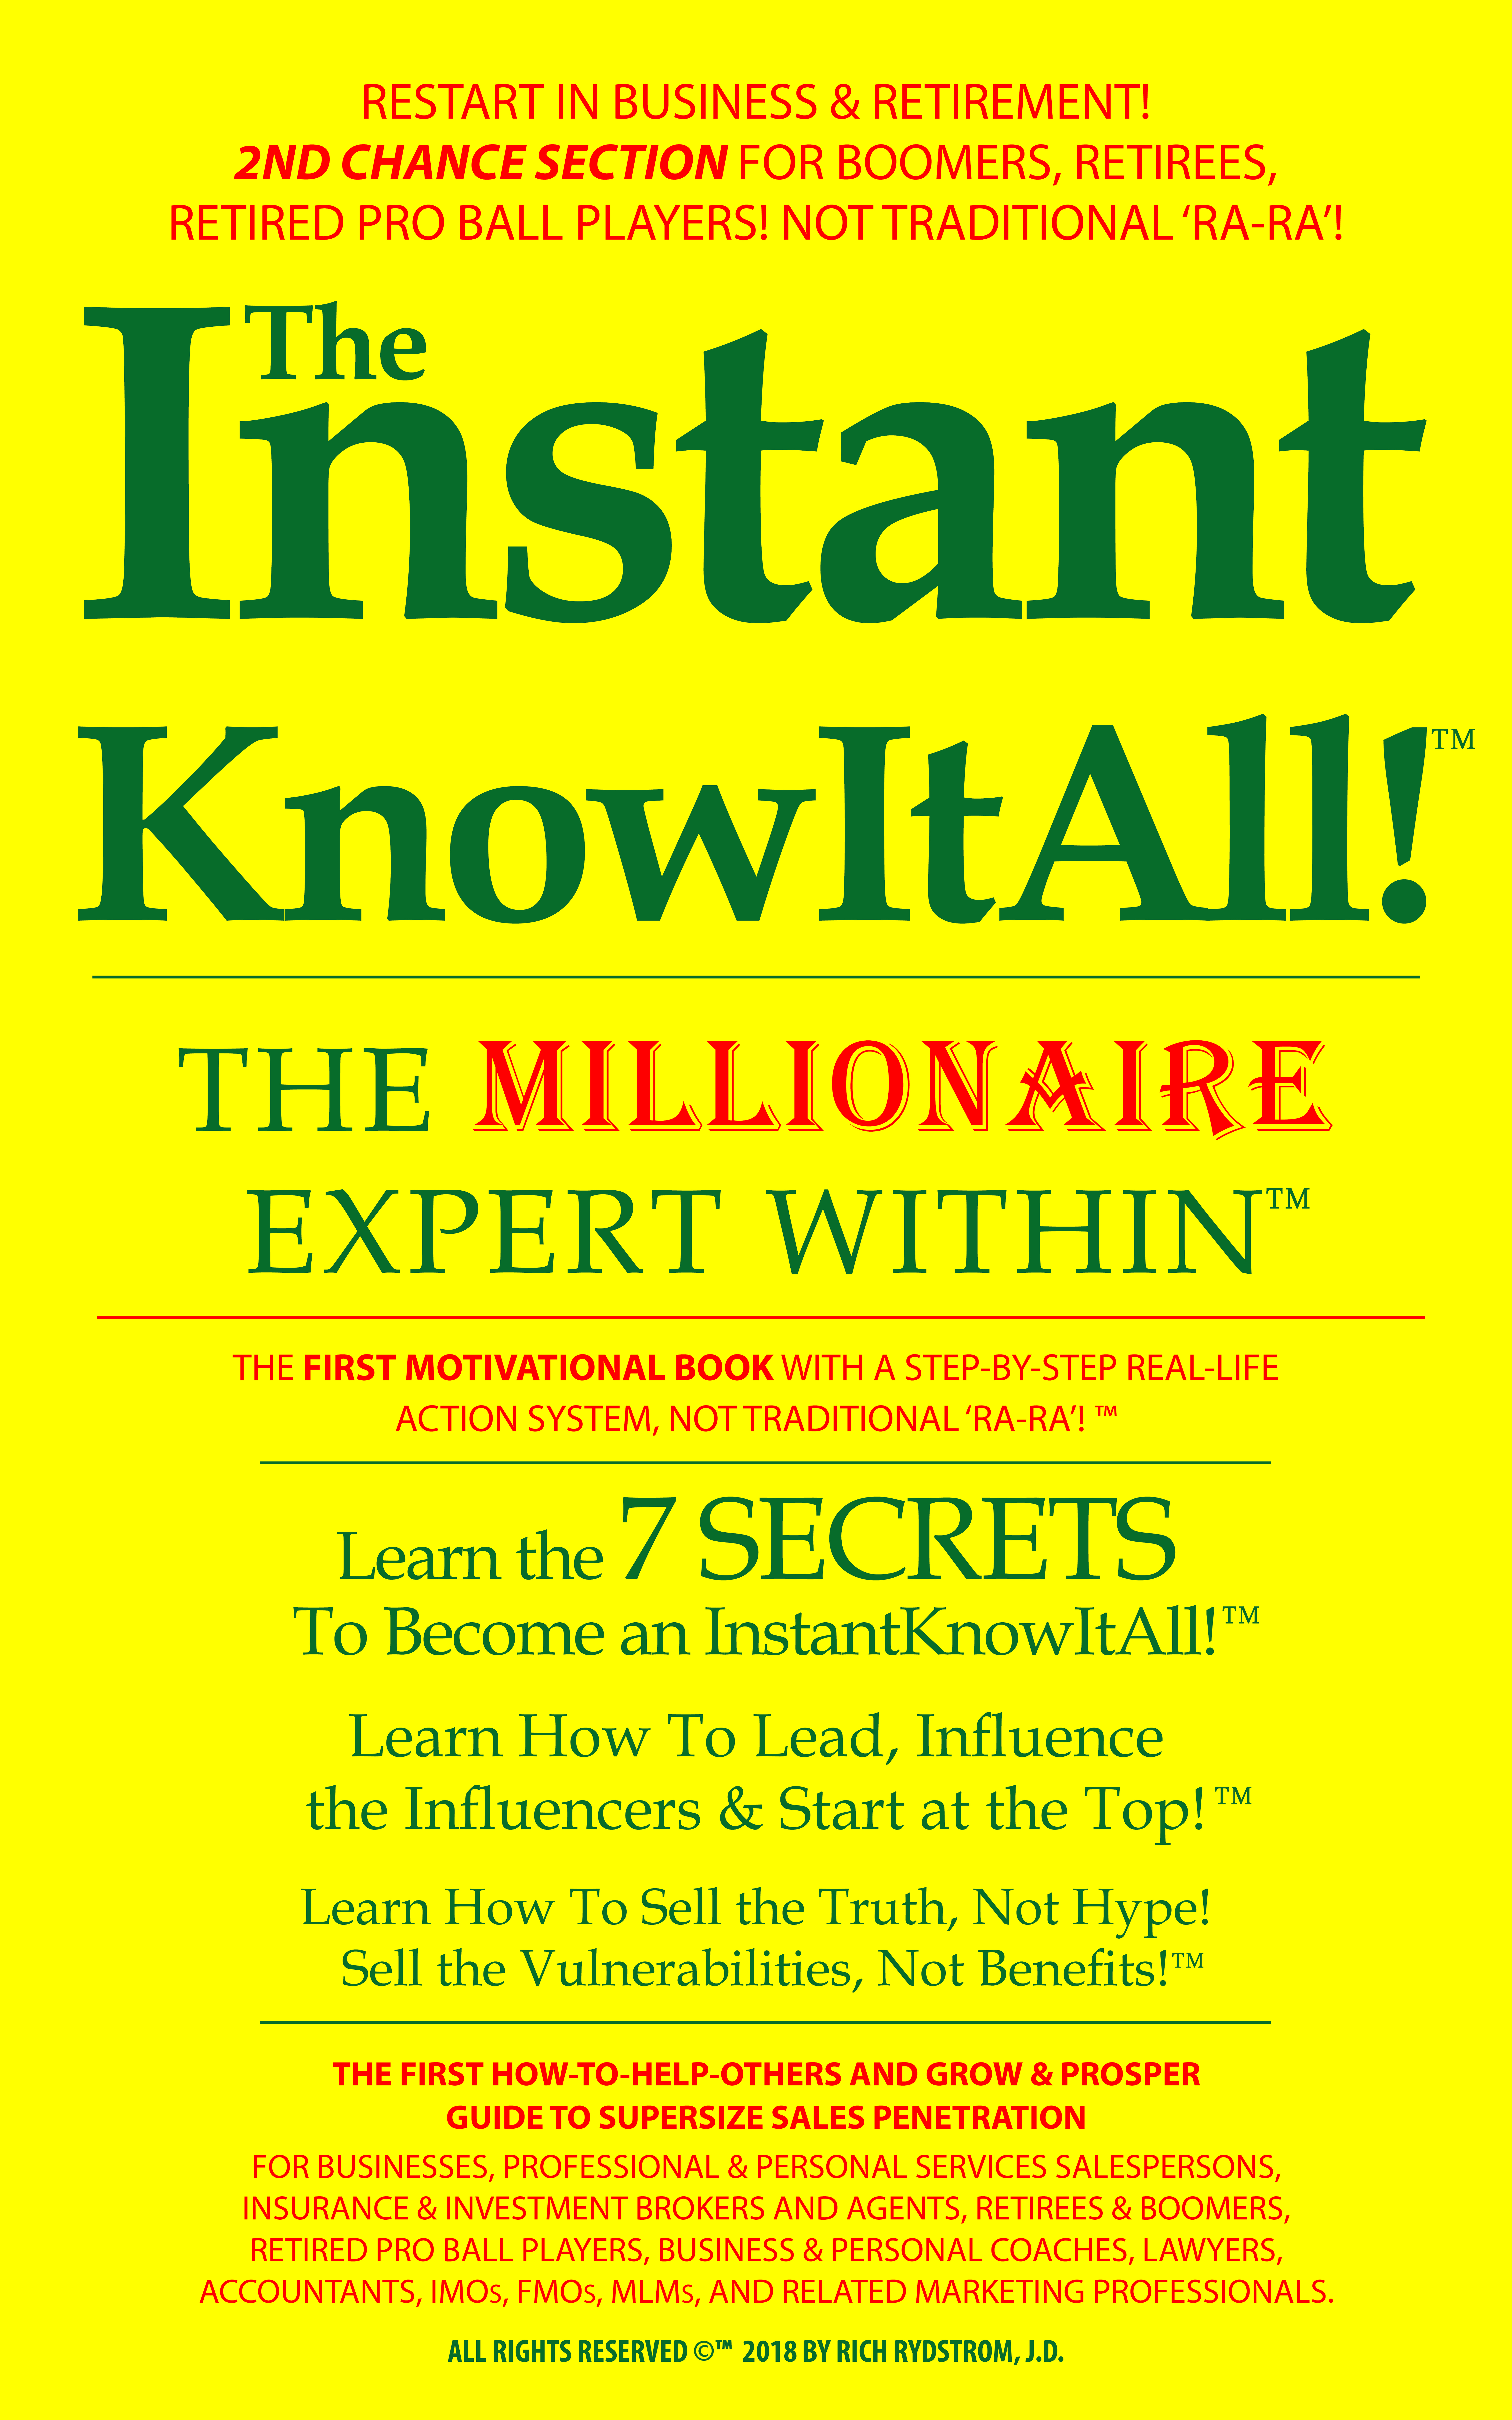 Book, Motivational, Boomers, Retirees, New Start, Former Pro Ball Players, Internet Marketing, Influencer Marketing, Newtork Marketing, MLM, Affilaite, Book Sales, Buy Book, Trump Tax,  Content Creators, Salespersons, Life Insurance, Personal Coaches, Business Coaches, Professional Services, Attorney, CPA, IMO, FMO, Lead, Influence, Start at Top, Sales, Selling Motivation